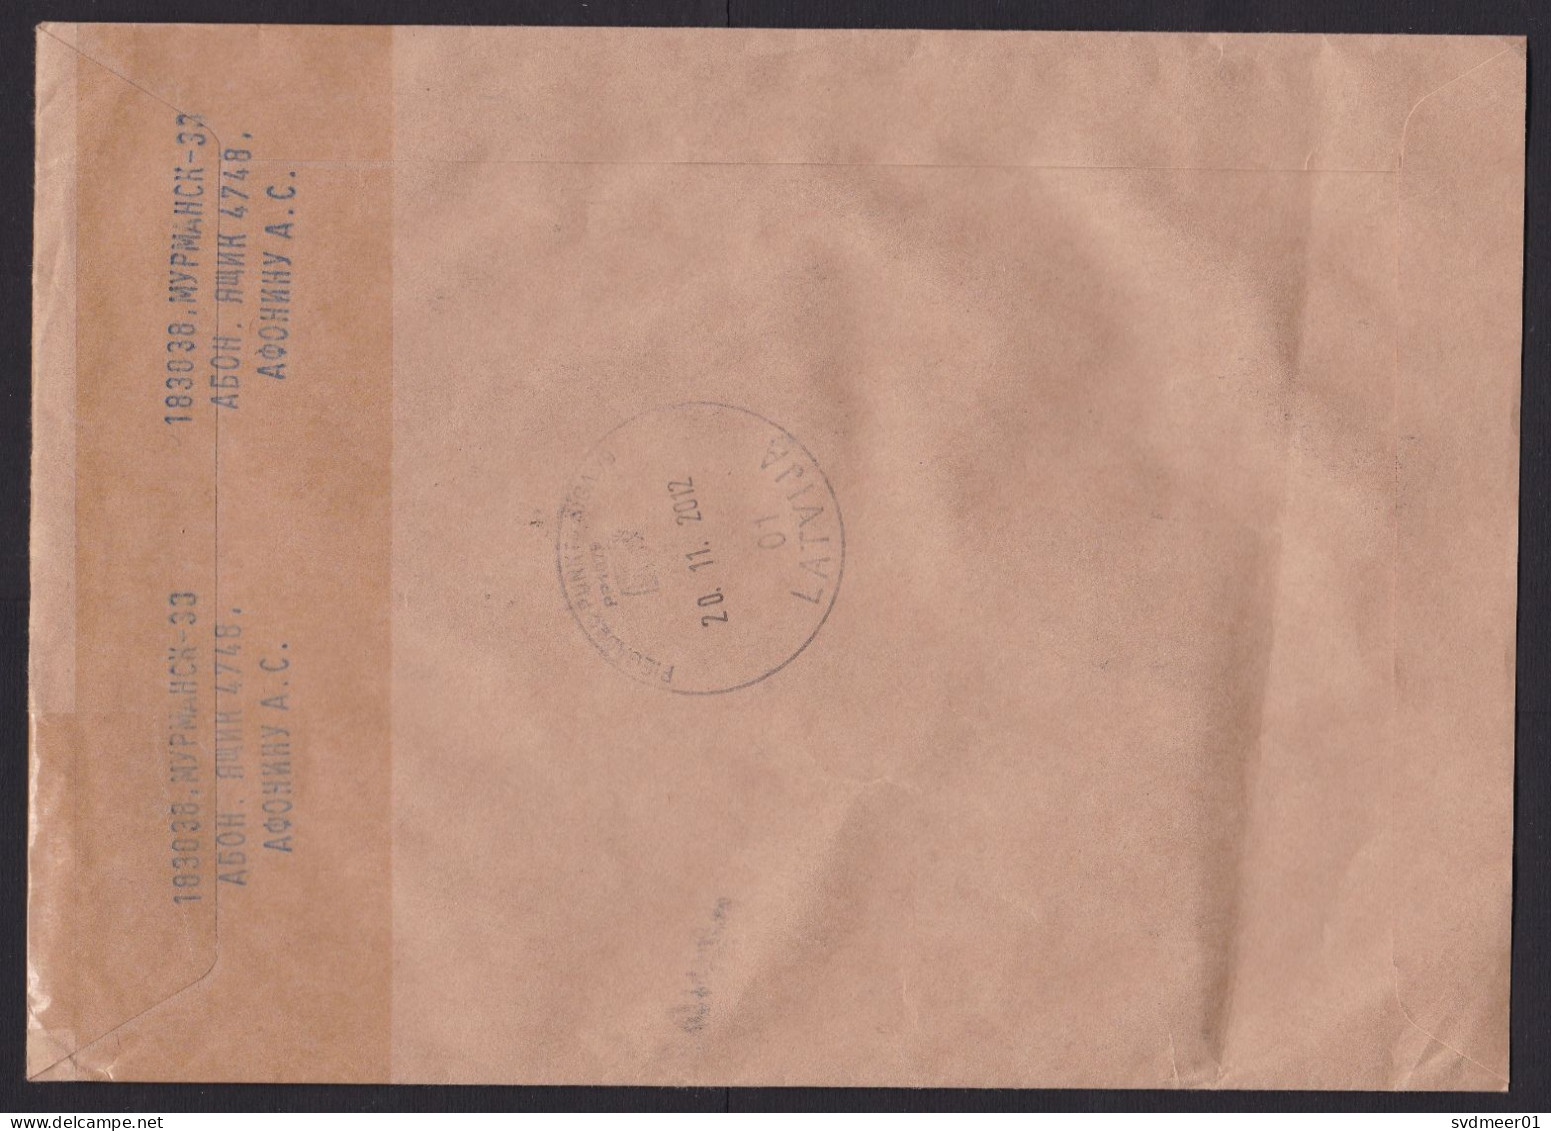 Russia: Registered Cover To Latvia, 2012, 4 Stamps, Cancel Atomic Ship, CN22 Customs Declaration Label (minor Creases) - Lettres & Documents